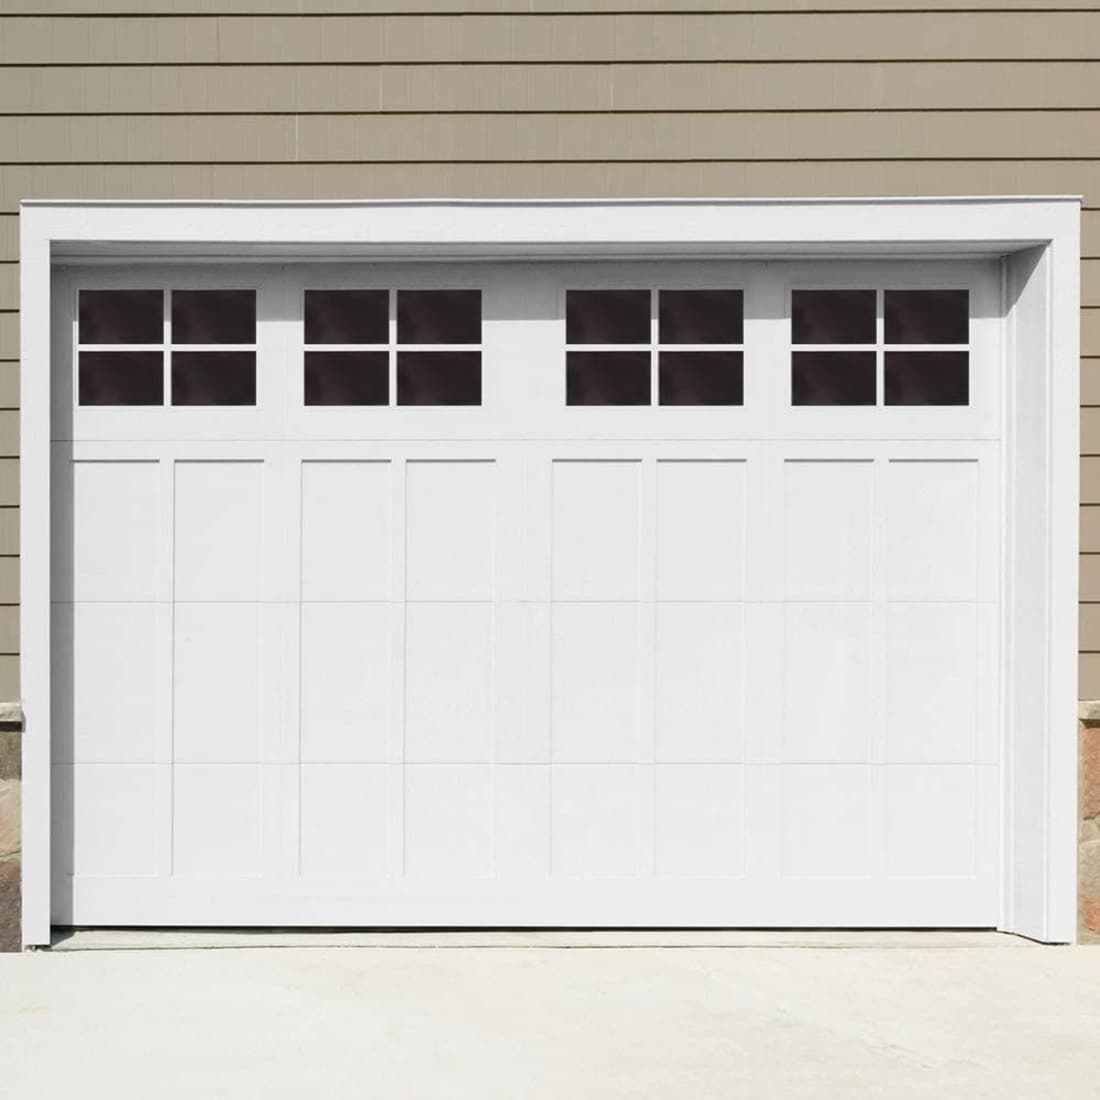 Sample Garage door decals lowes for Ideas for 2021